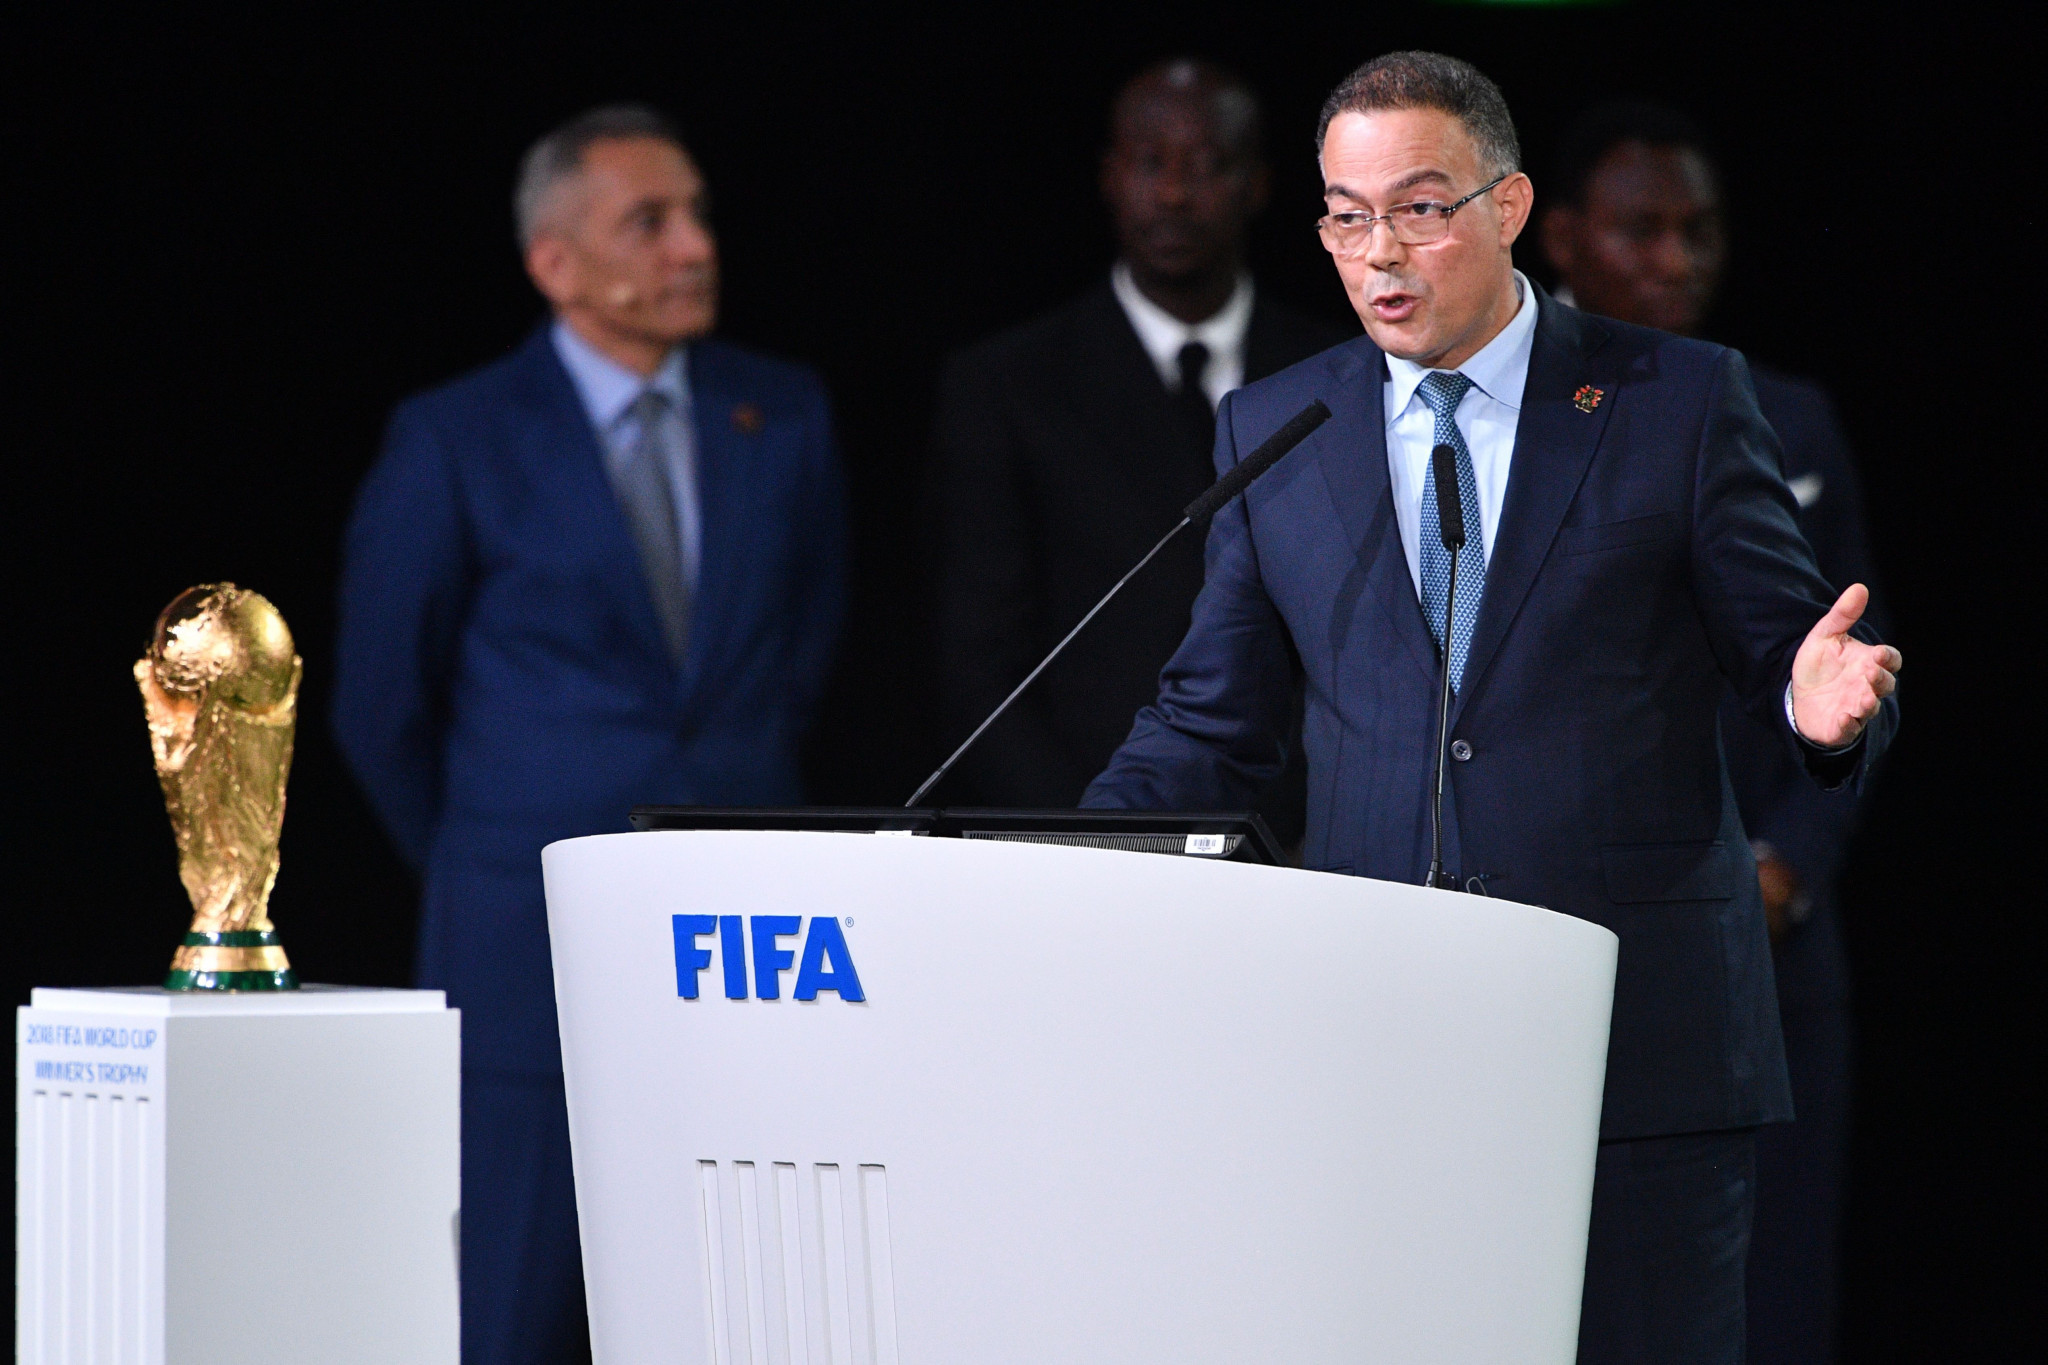 Fouzi Lekjaa has been one of the most vocal supporters of a controversial proposal to host the biennial FIFA World Cup ©Getty Images